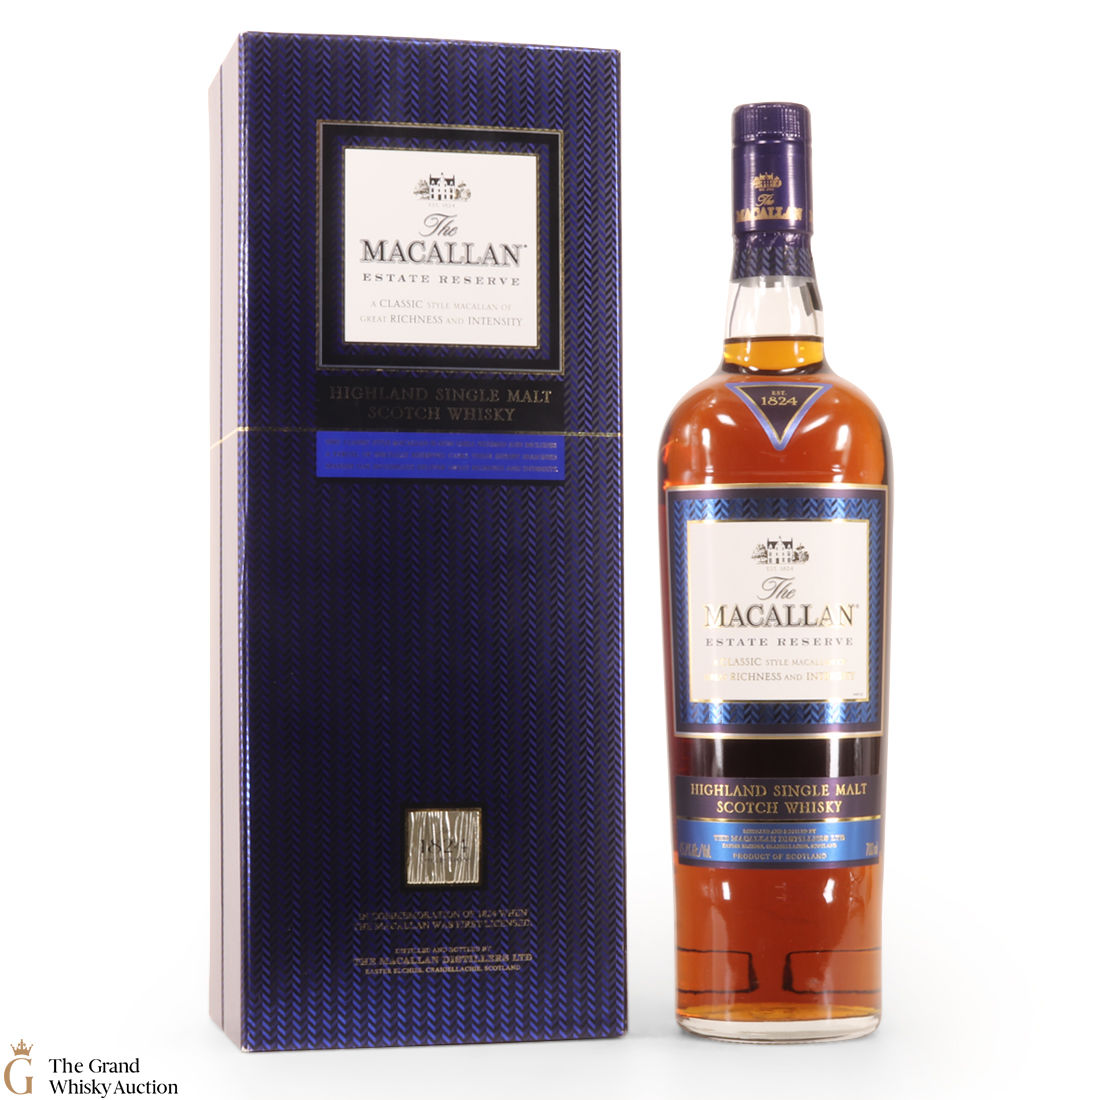 Macallan Estate Reserve 1824 Collection Auction The Grand Whisky Auction